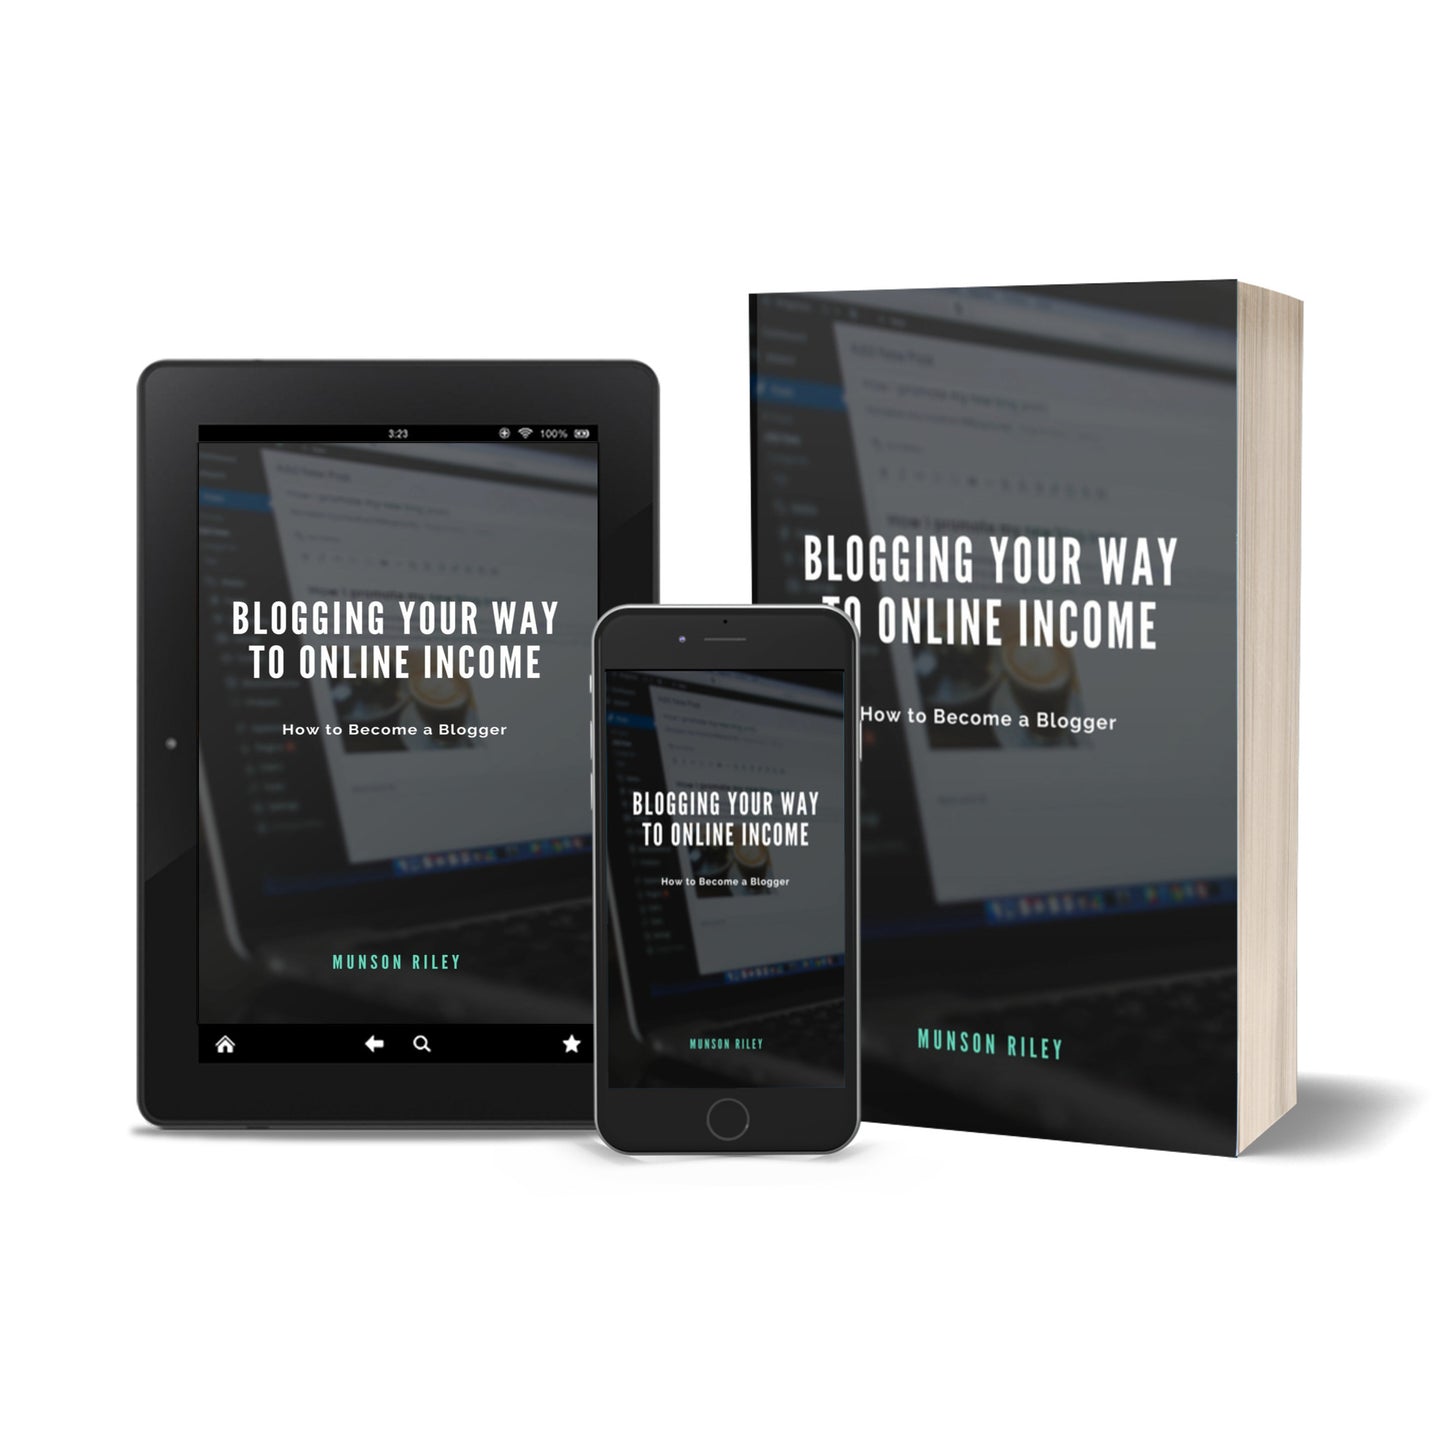 Blogging Your Way to Online Income: How to Become a Blogger by Munson Riley Digital Download